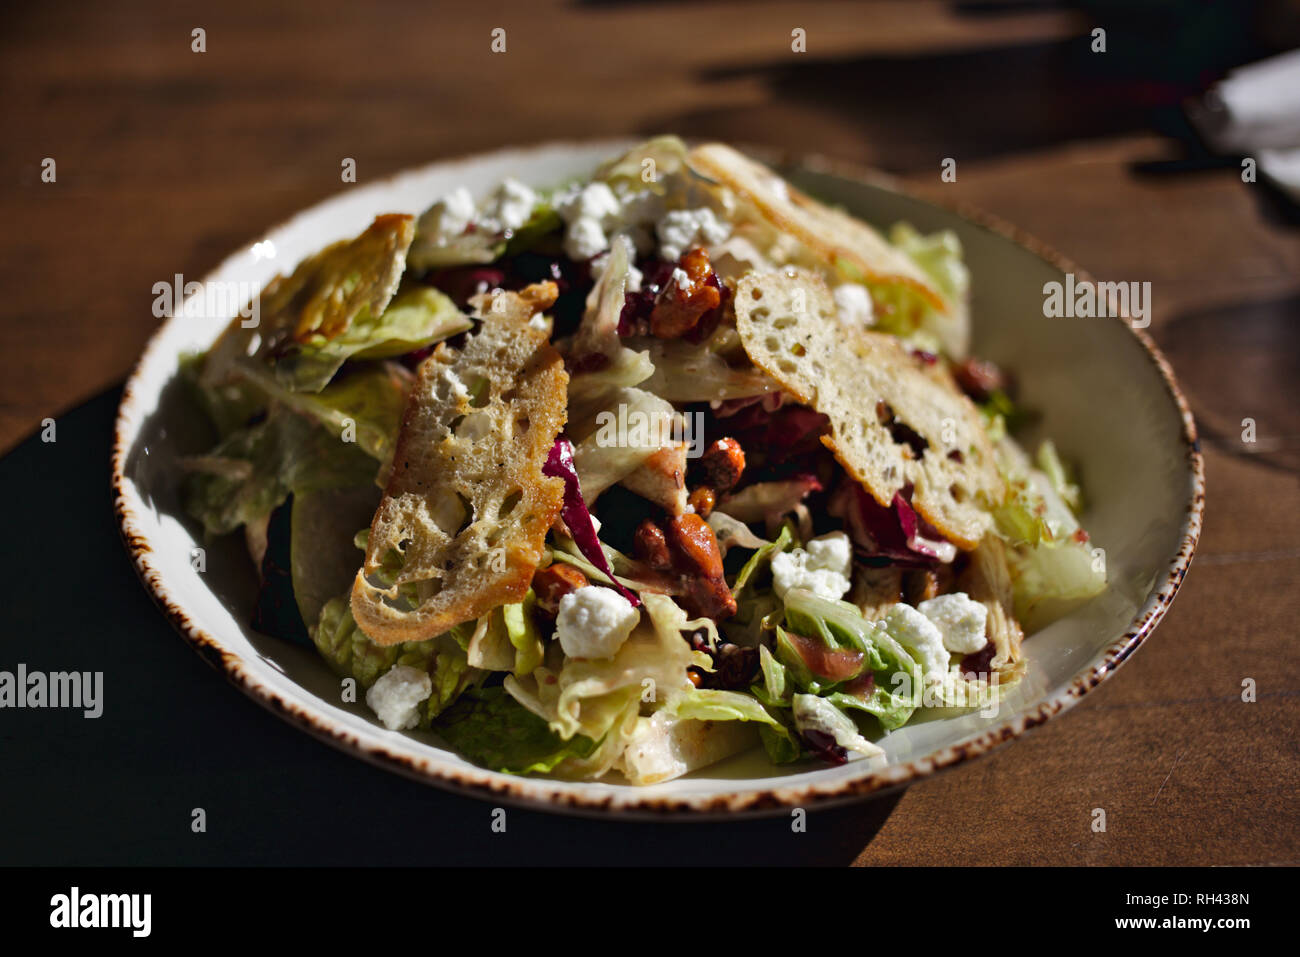 The Waldorf - A Waldorf salad ordered at a sidewalk cafe in Downtown Huntington Beach, CA Stock Photo